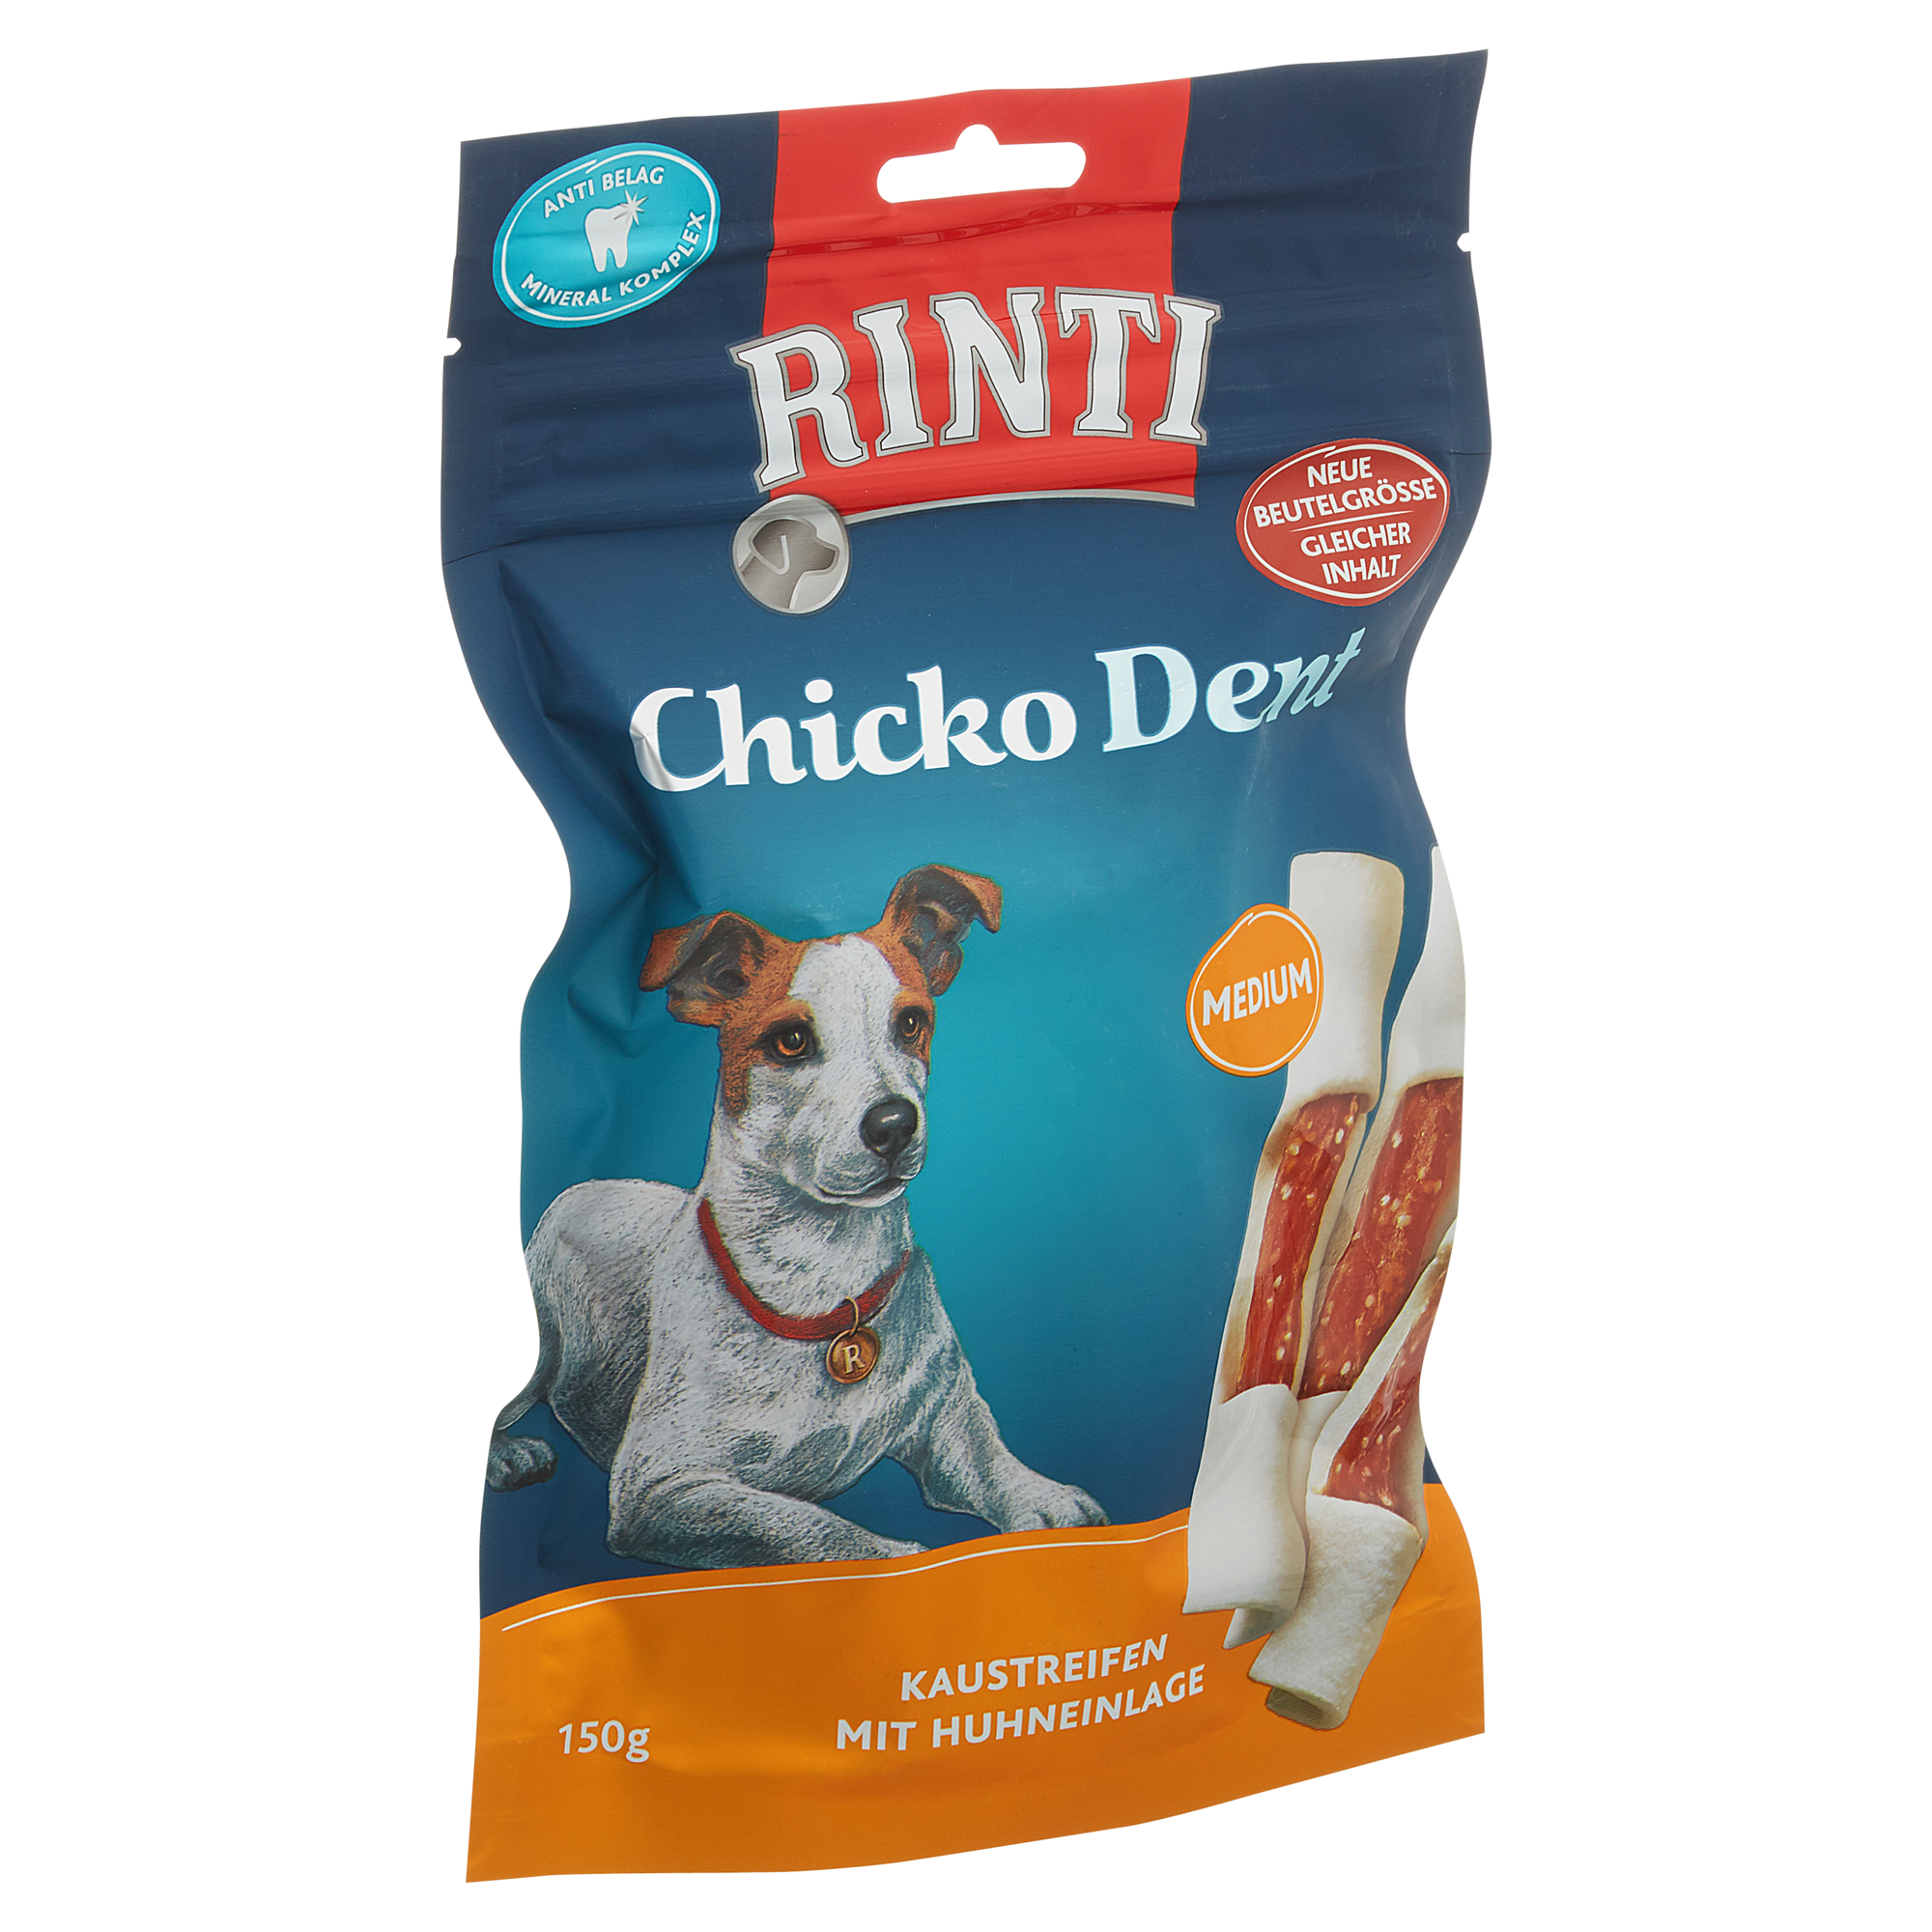 Hundesnack "Chicko" Dent Medium mit Huhn 150 g + product picture